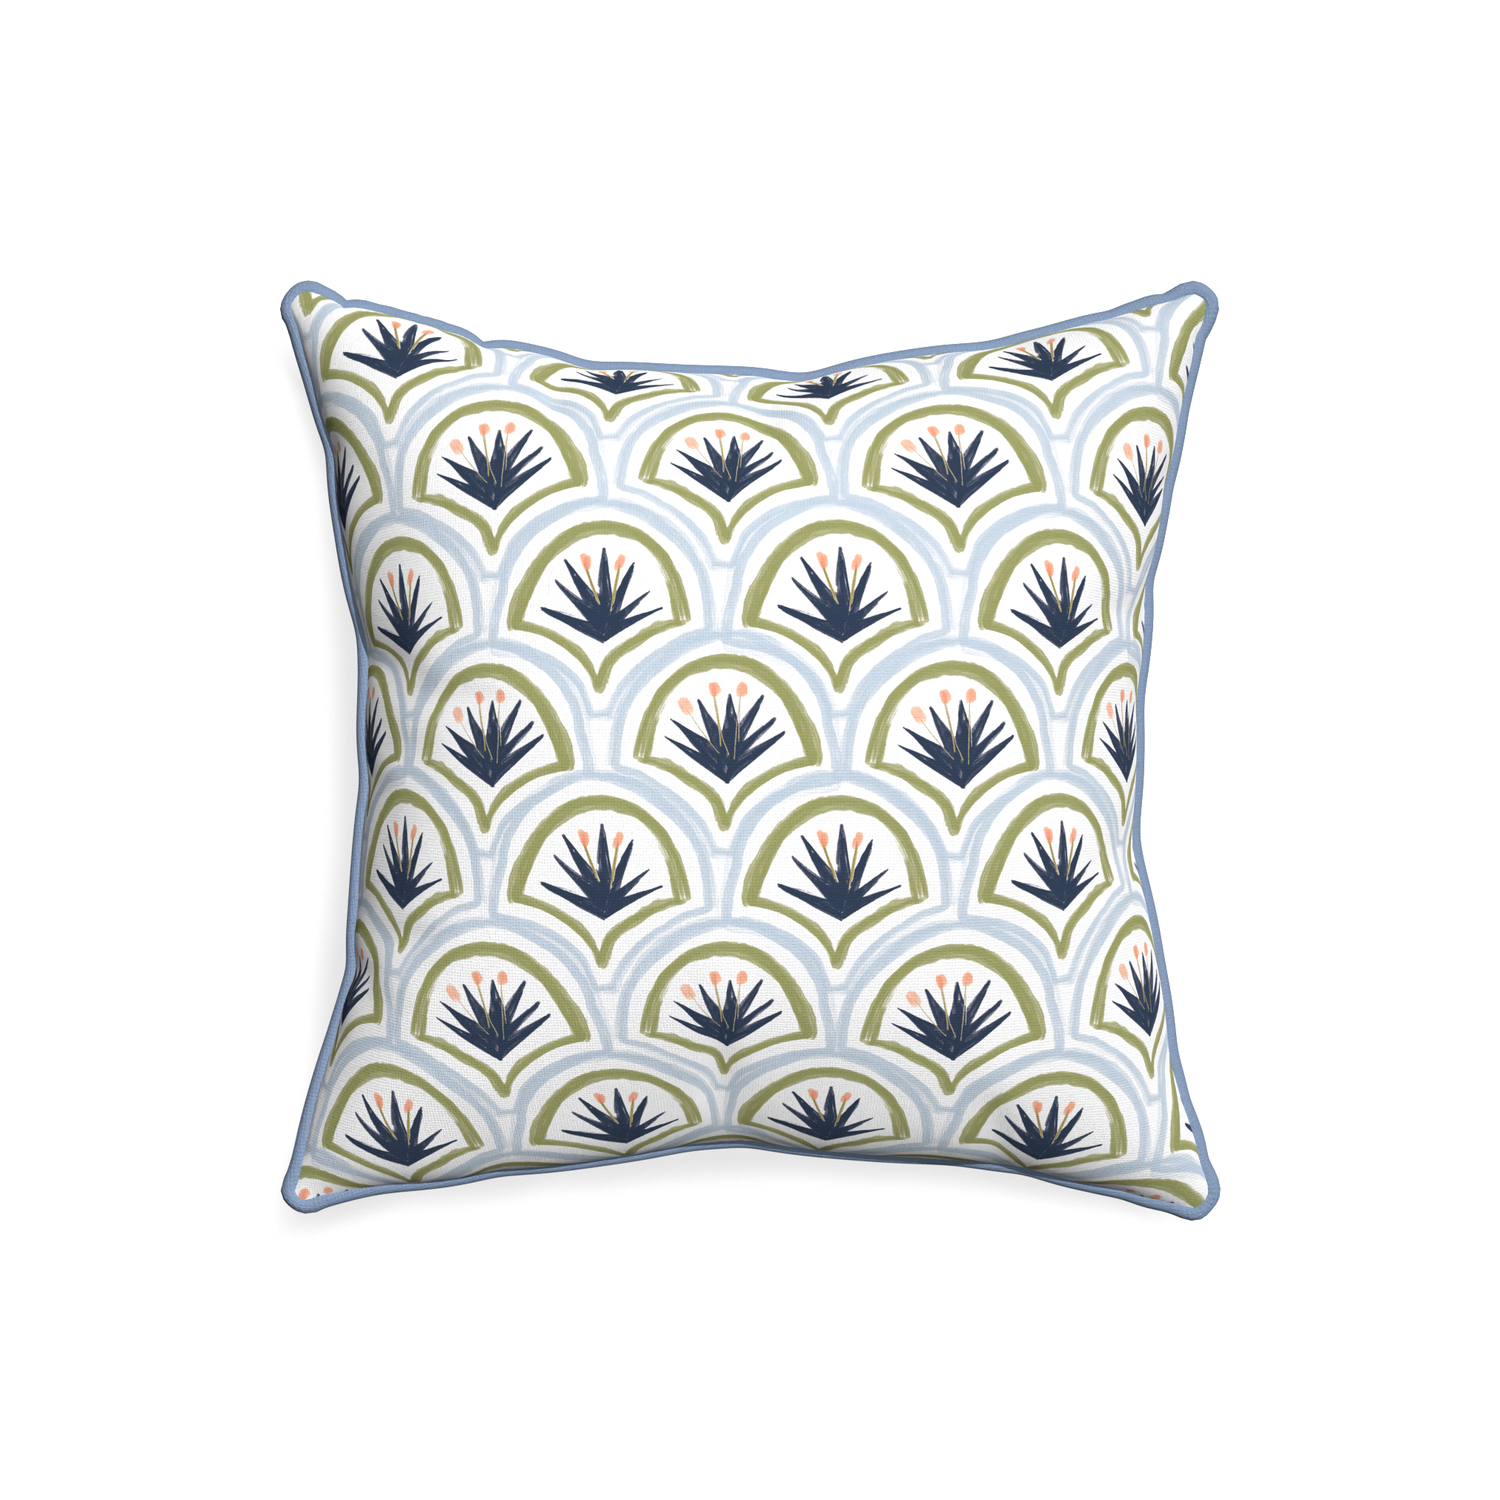 20-square thatcher midnight custom art deco palm patternpillow with sky piping on white background